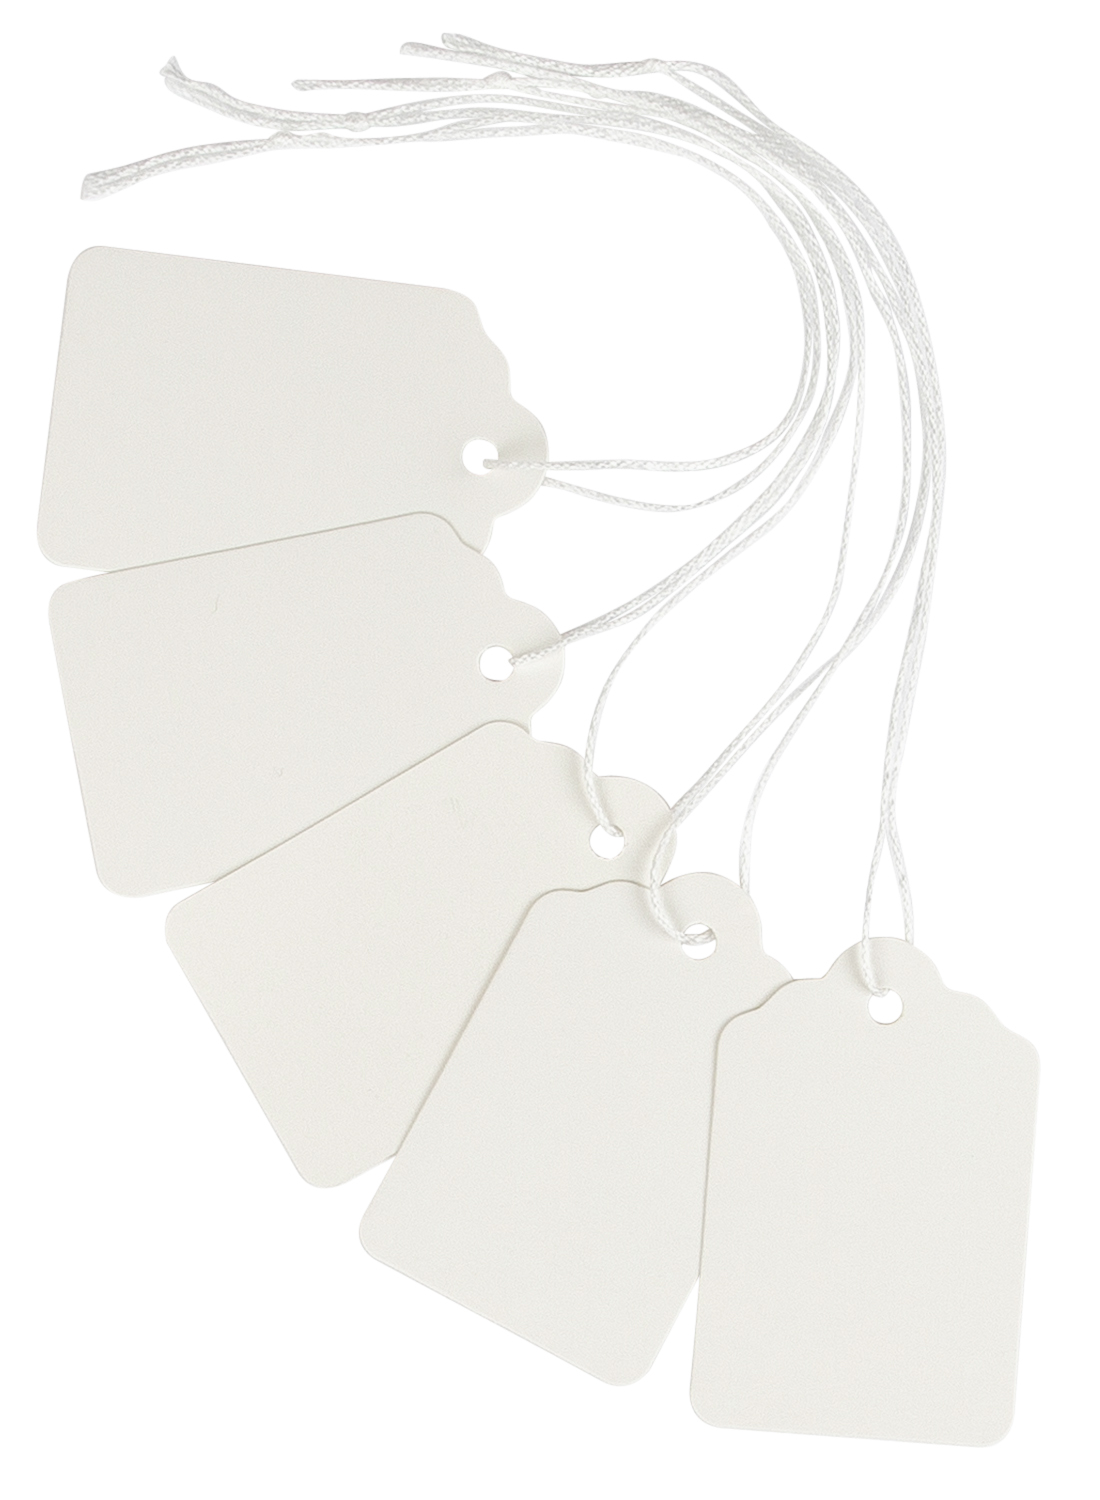 White Marking Tags with String Attached, 2 1/4” x1 7/16” (57x37mm), Box of  500, Pre-Strung Hanging Merchandise Labeling Tags - EZDOM Tags